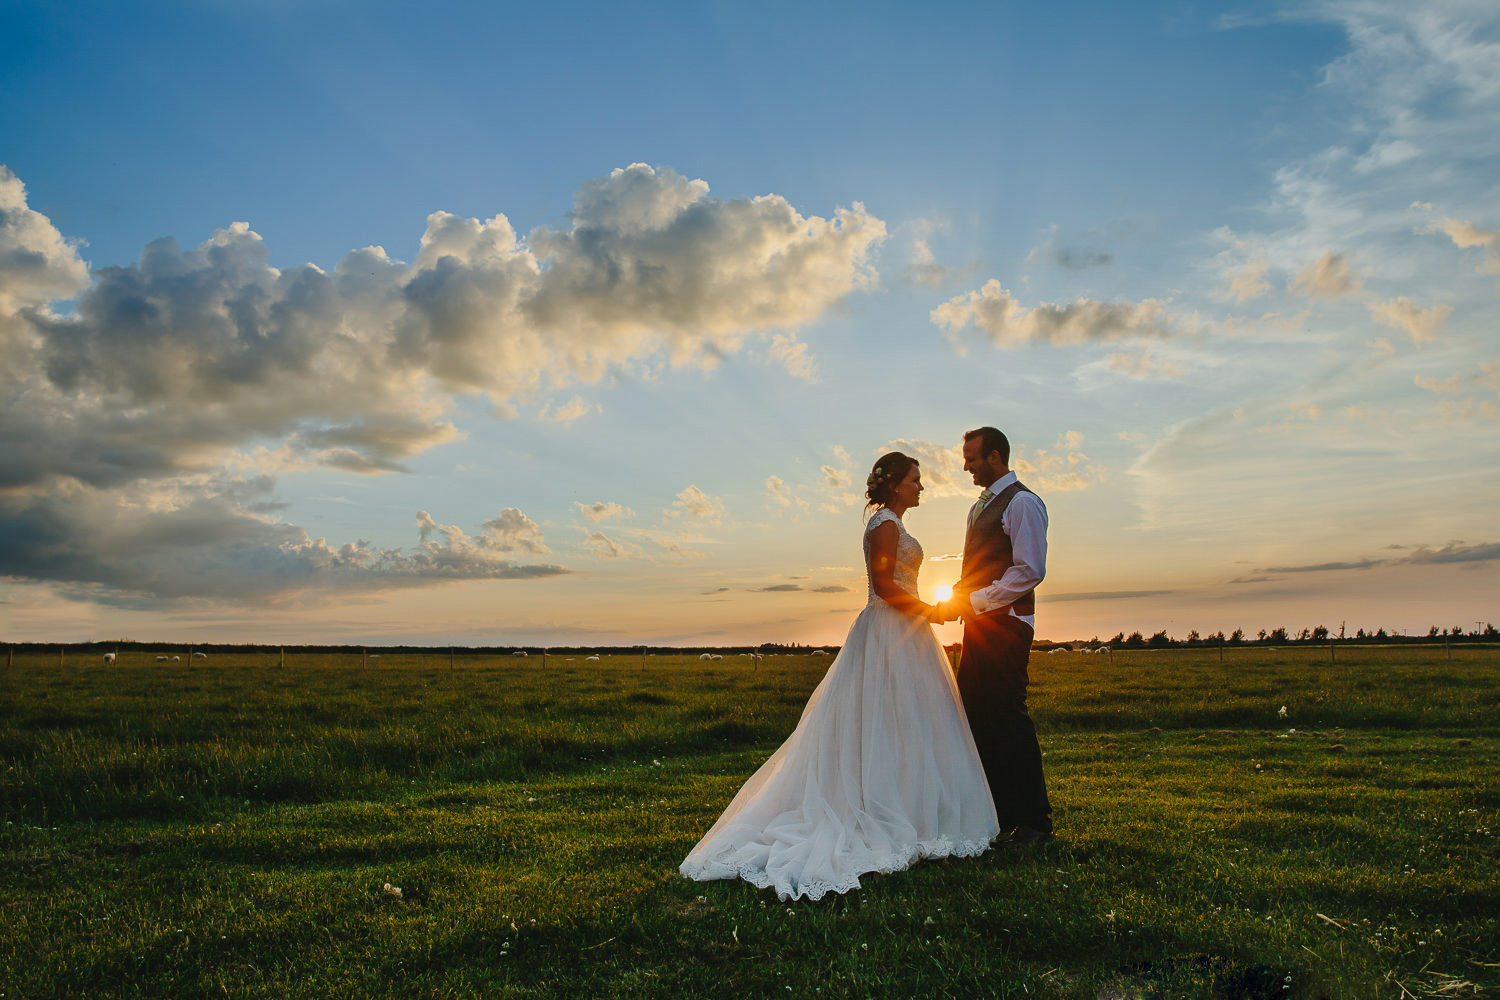 Bride and groom in front of a sunset